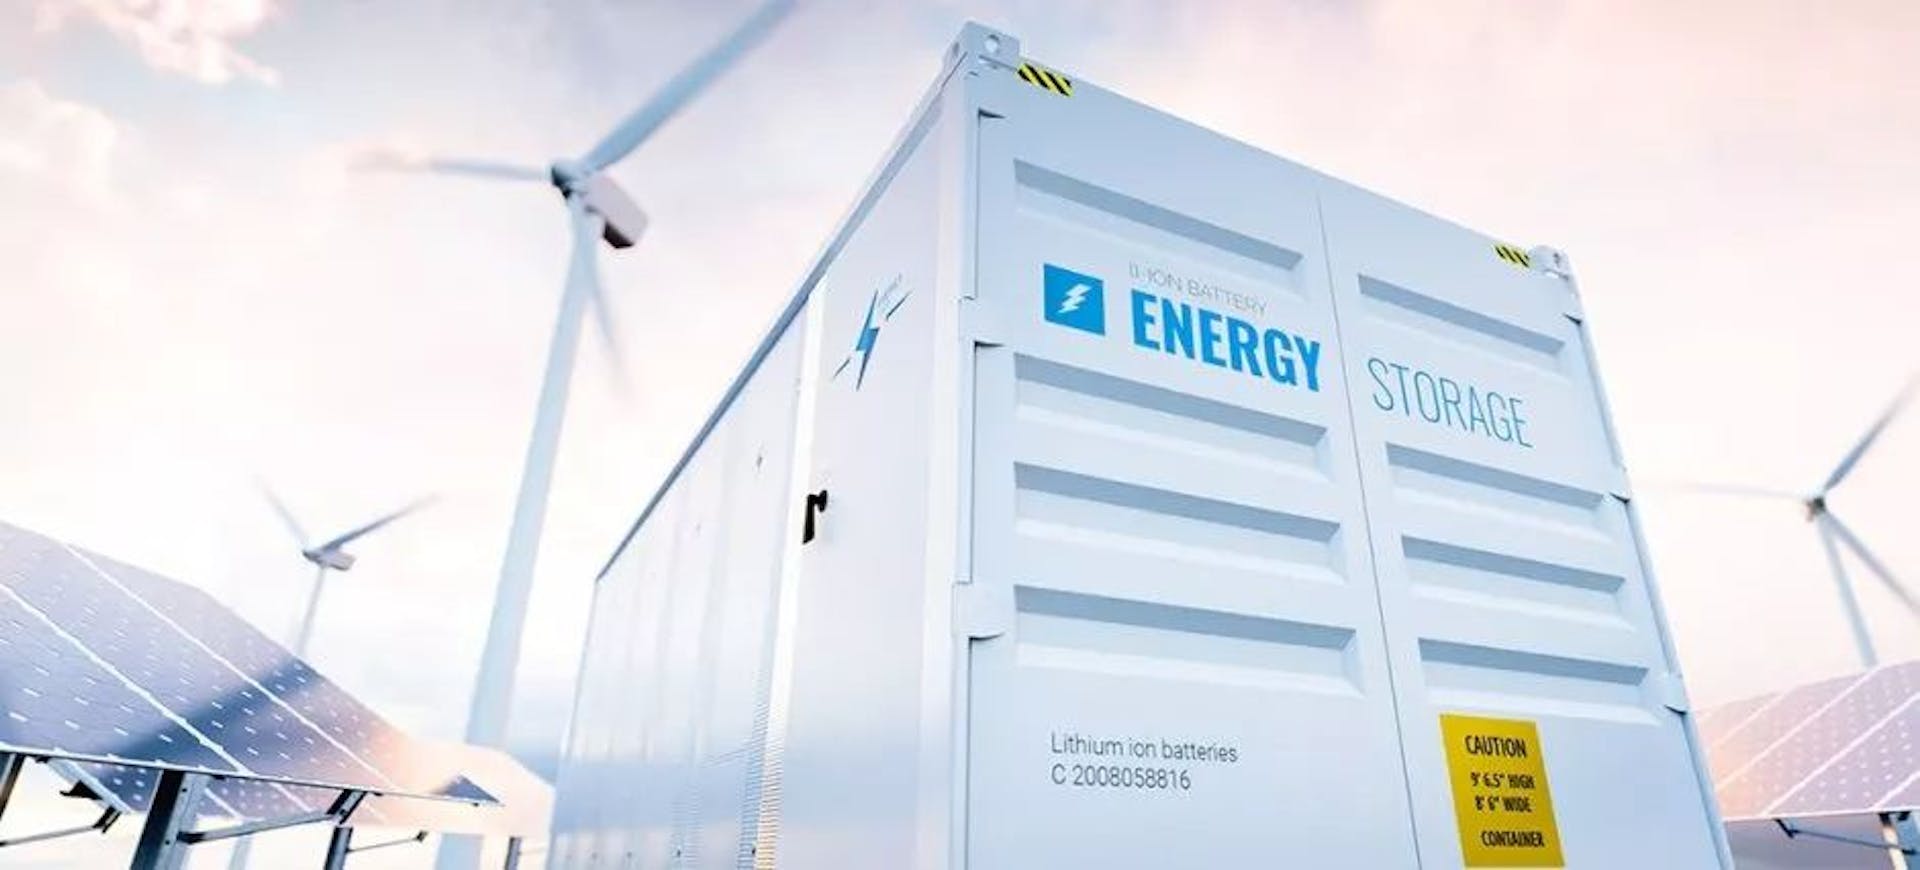 featured image - What is a BESS (Battery Energy Storage System) and How Does it Work?